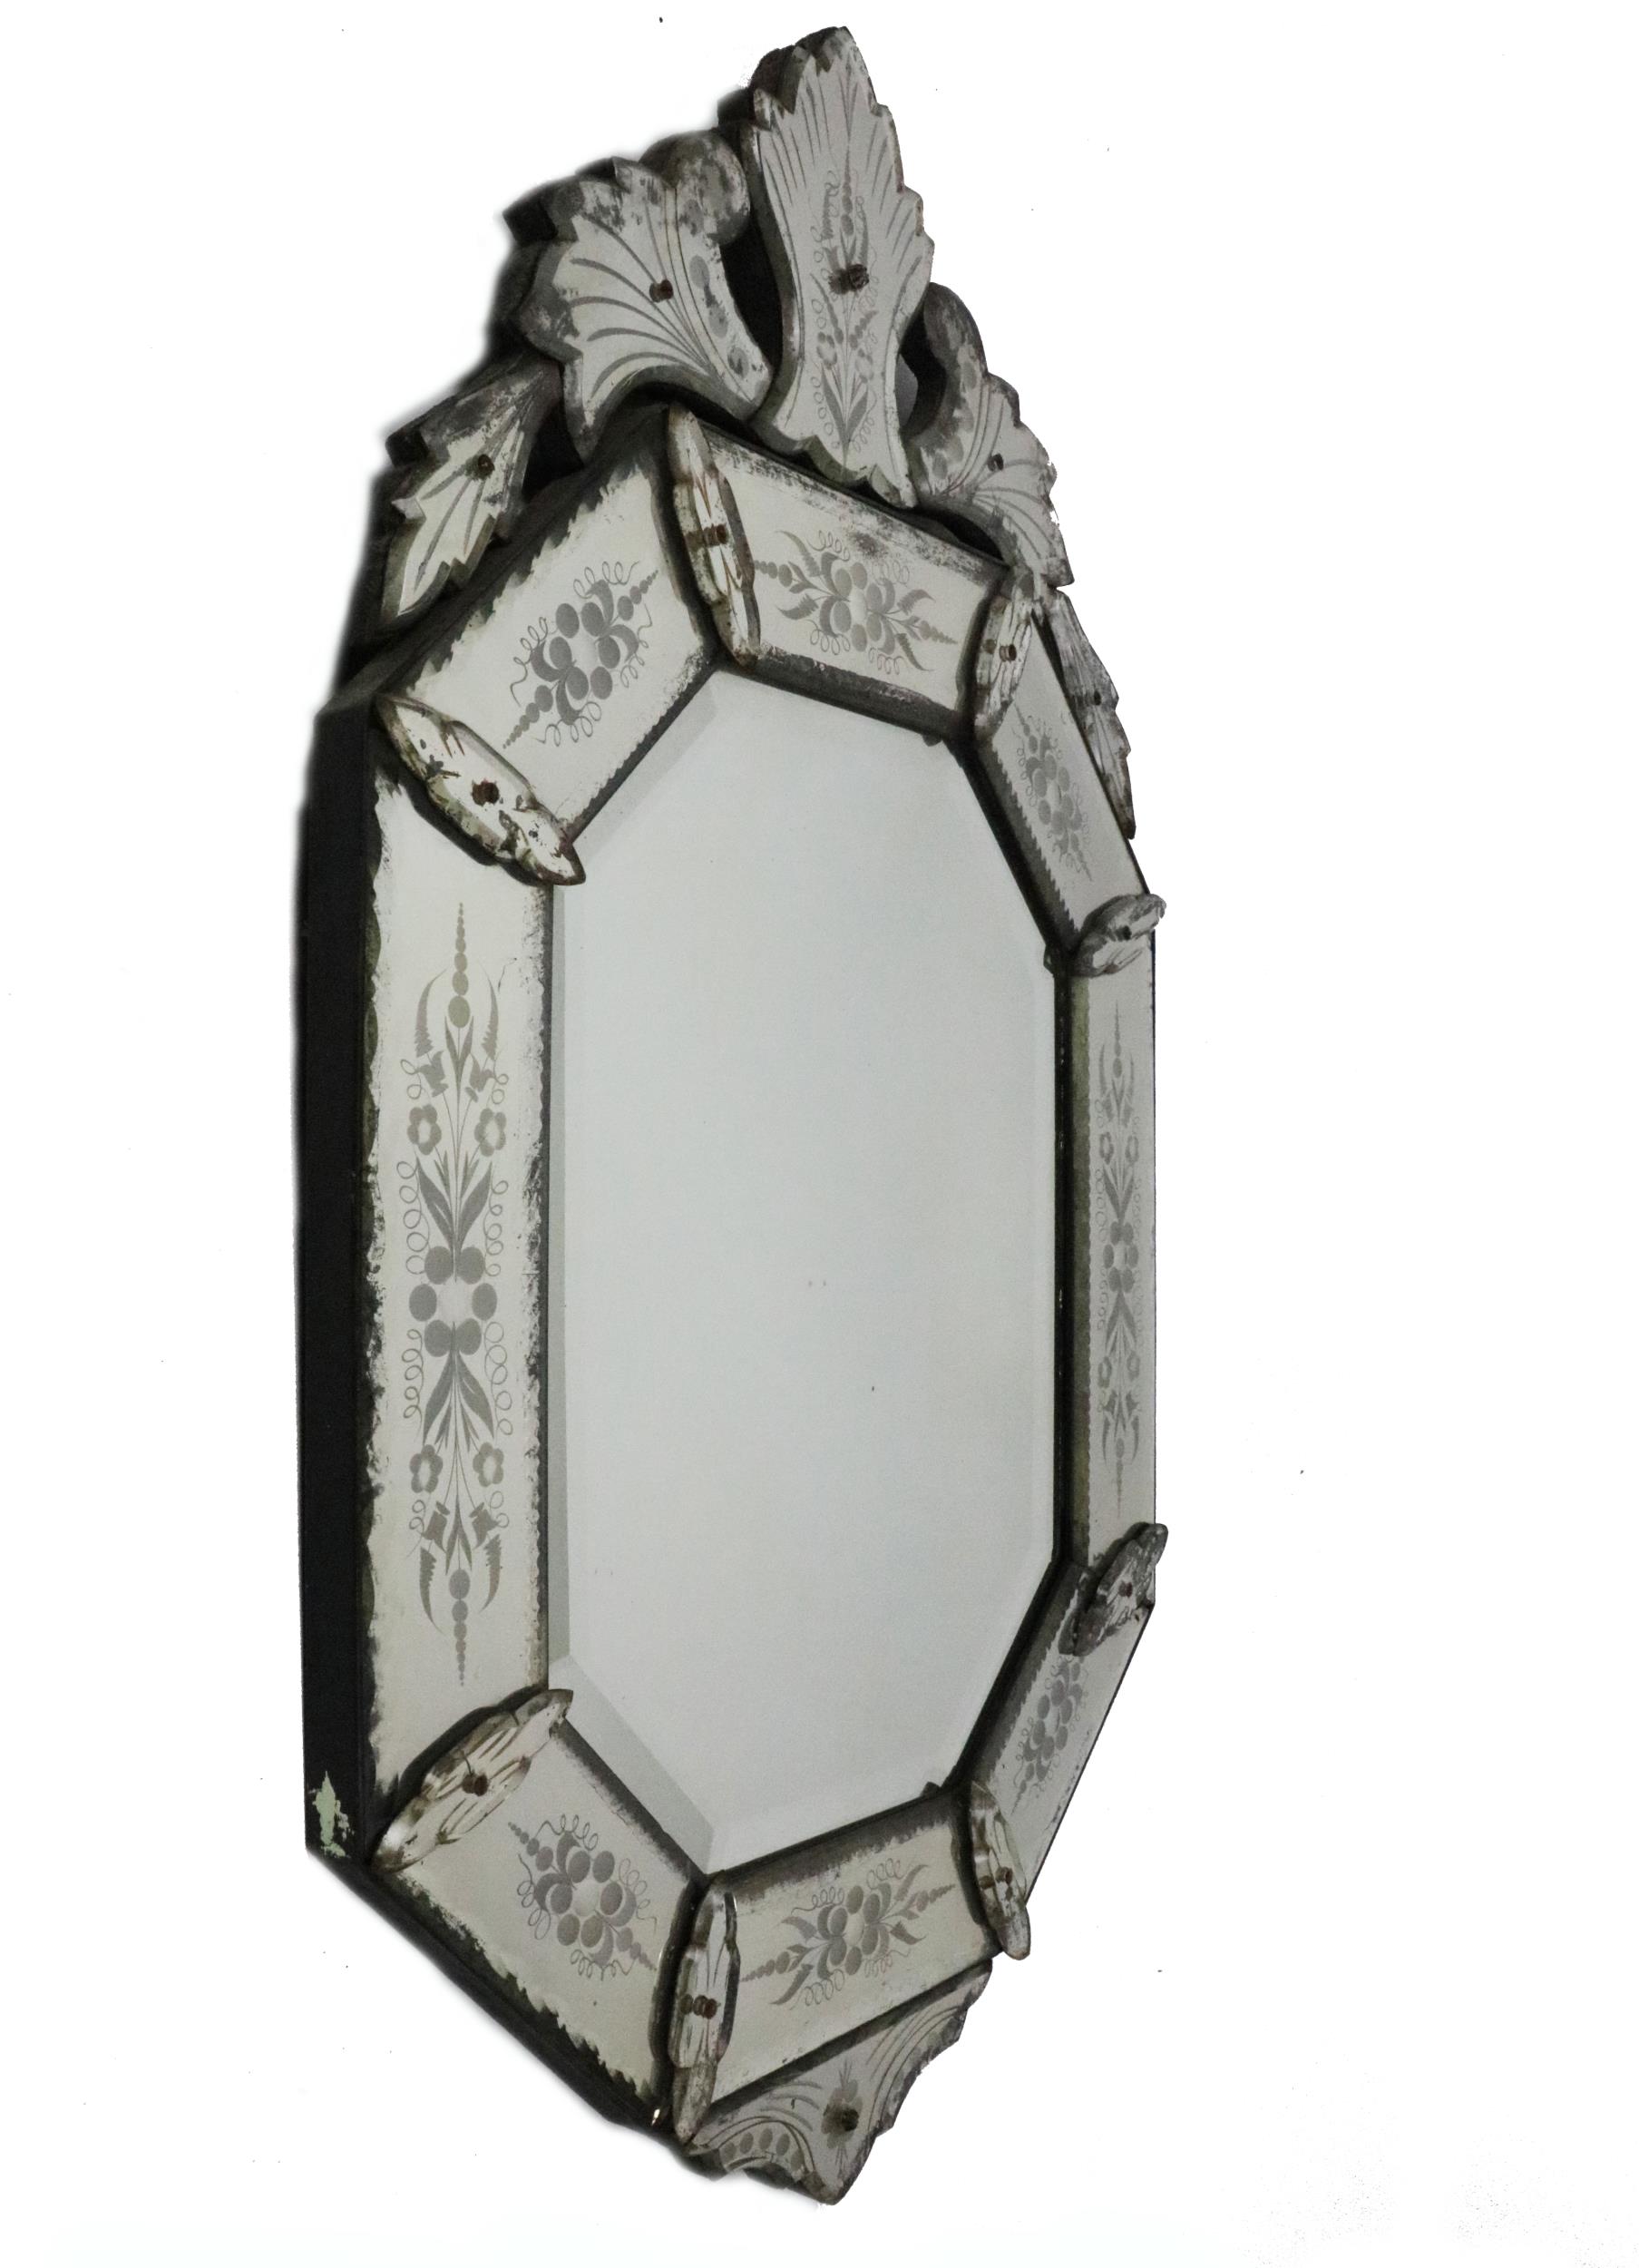 An antique Venetian glass ornate Wall Mirror, with shaped cornice, etched panels, approx. 99cms x